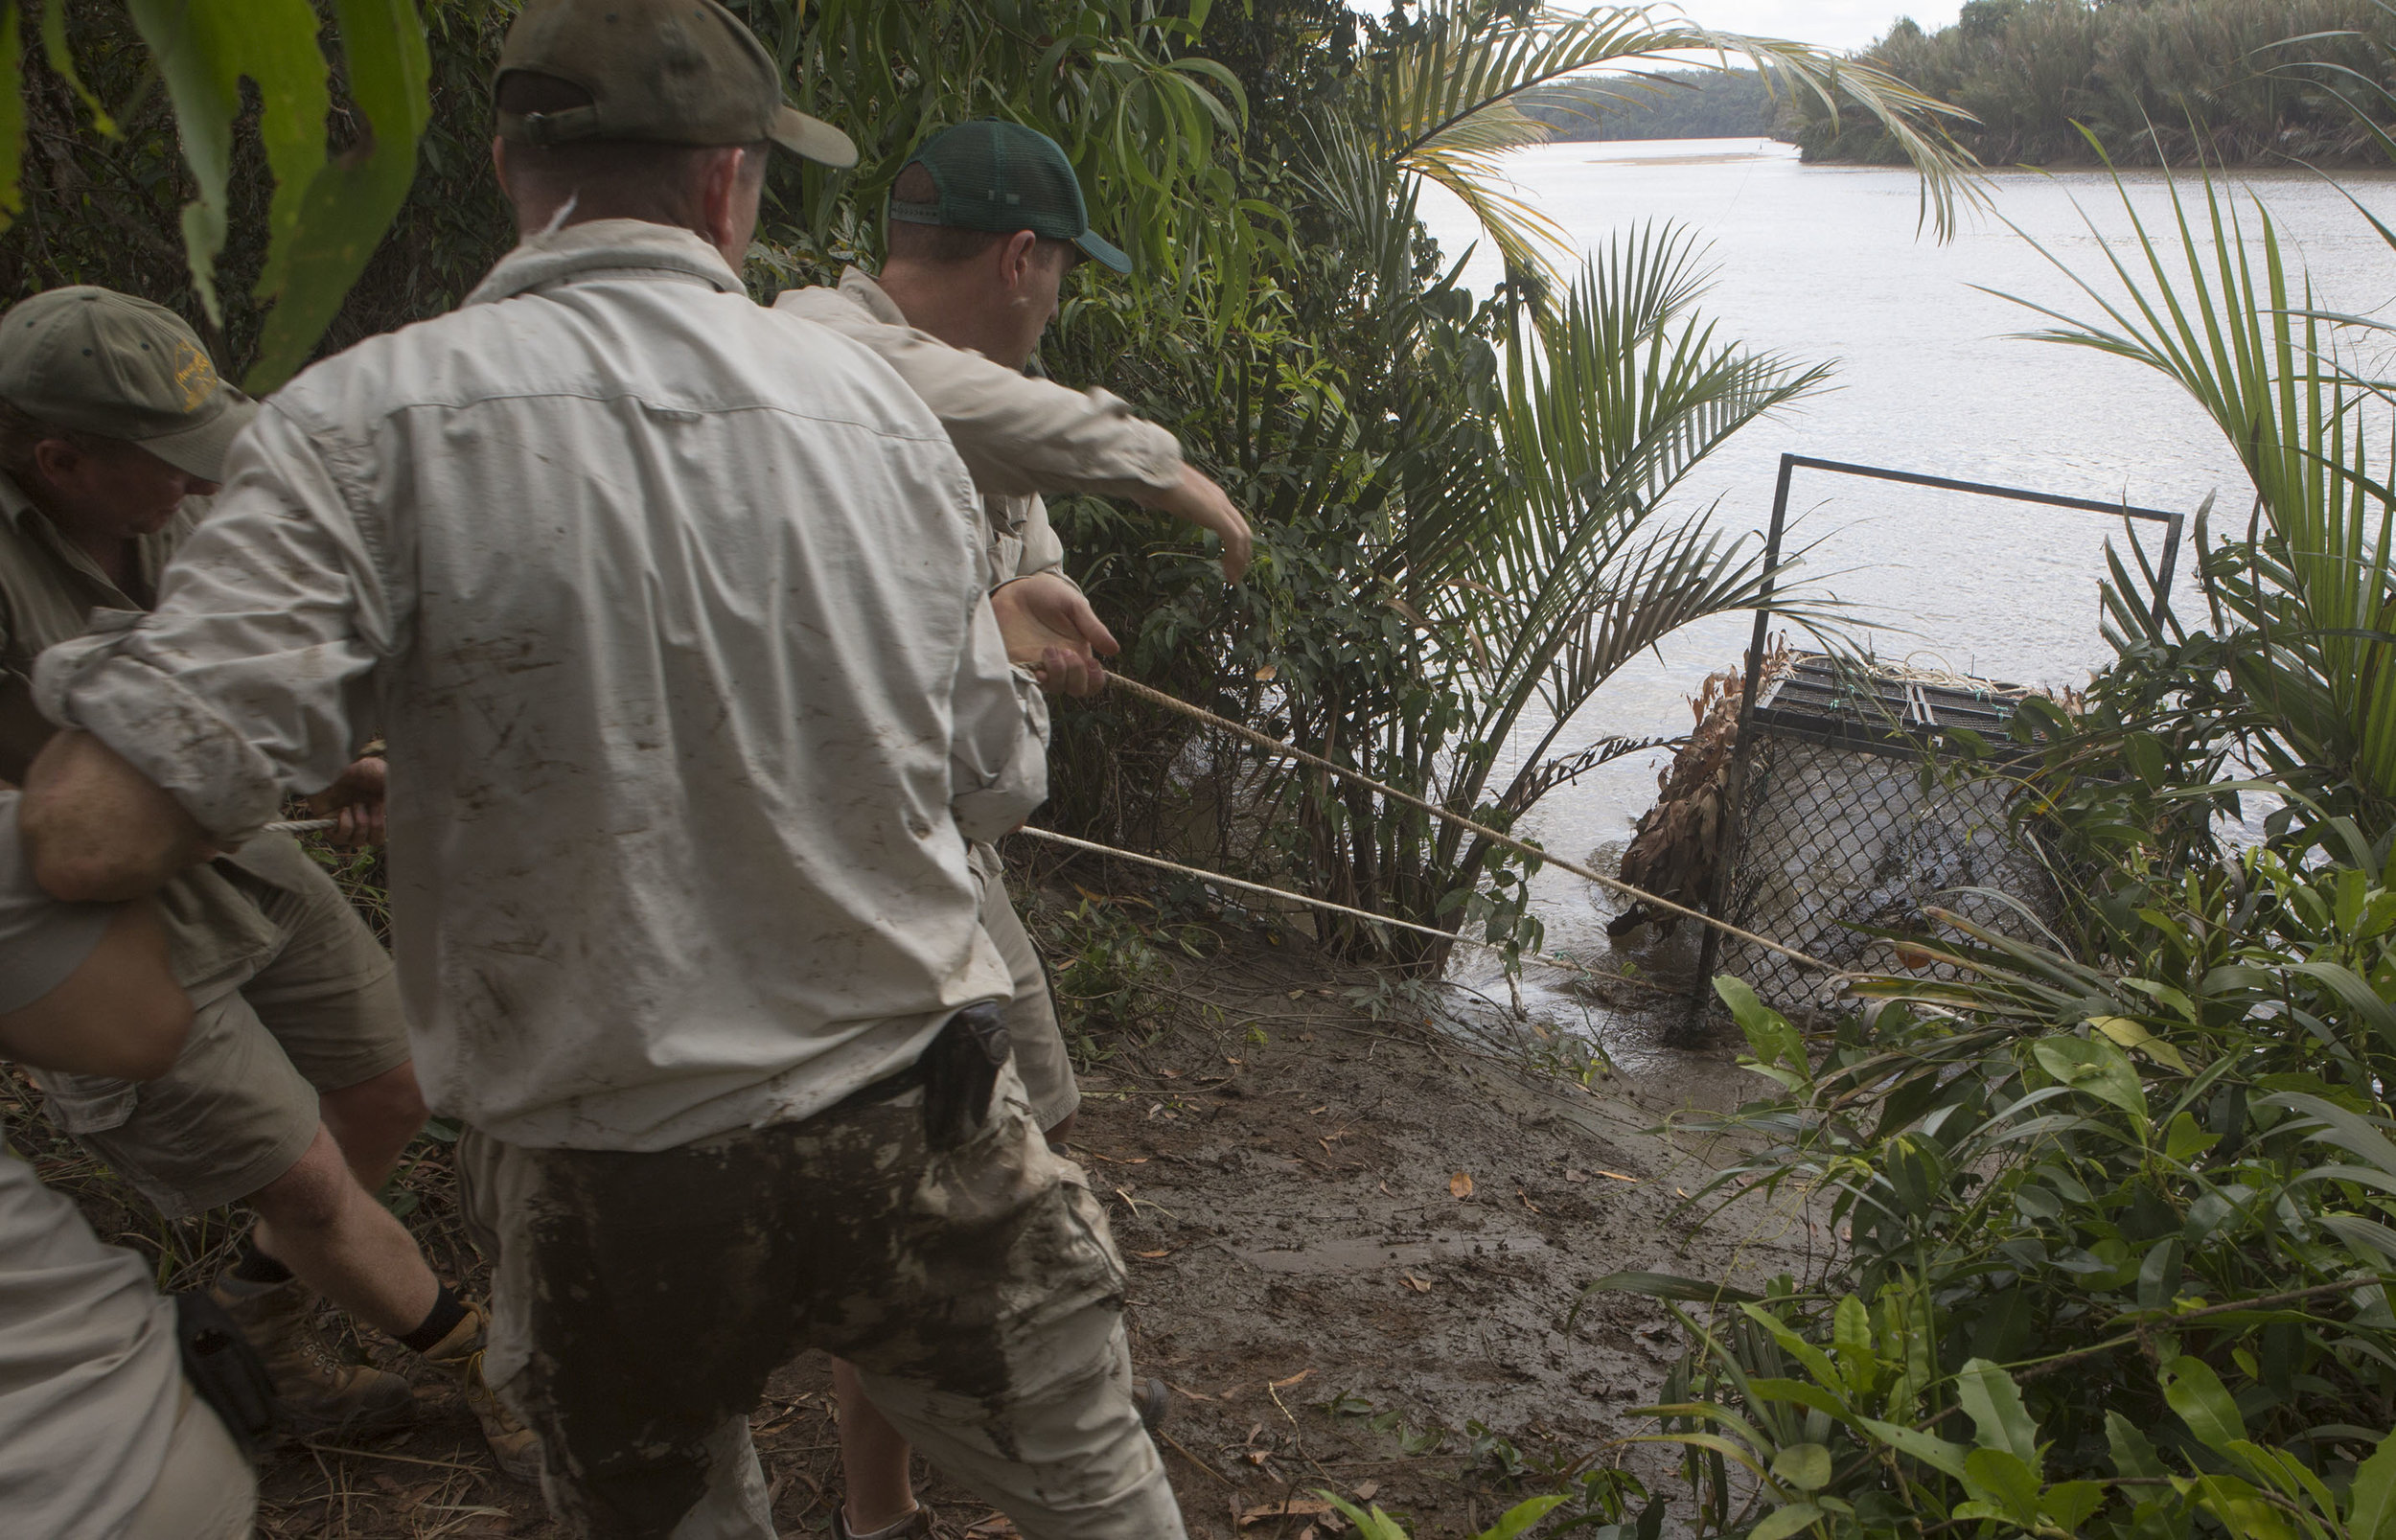  Crocodile Team all helping to pull the 15.5foot crocodile (in the floating trap onto land)&nbsp;  Steve Irwin Wildlife Reserve, Cape York, Australia.  © Russell Shakespeare/Australia Zoo 